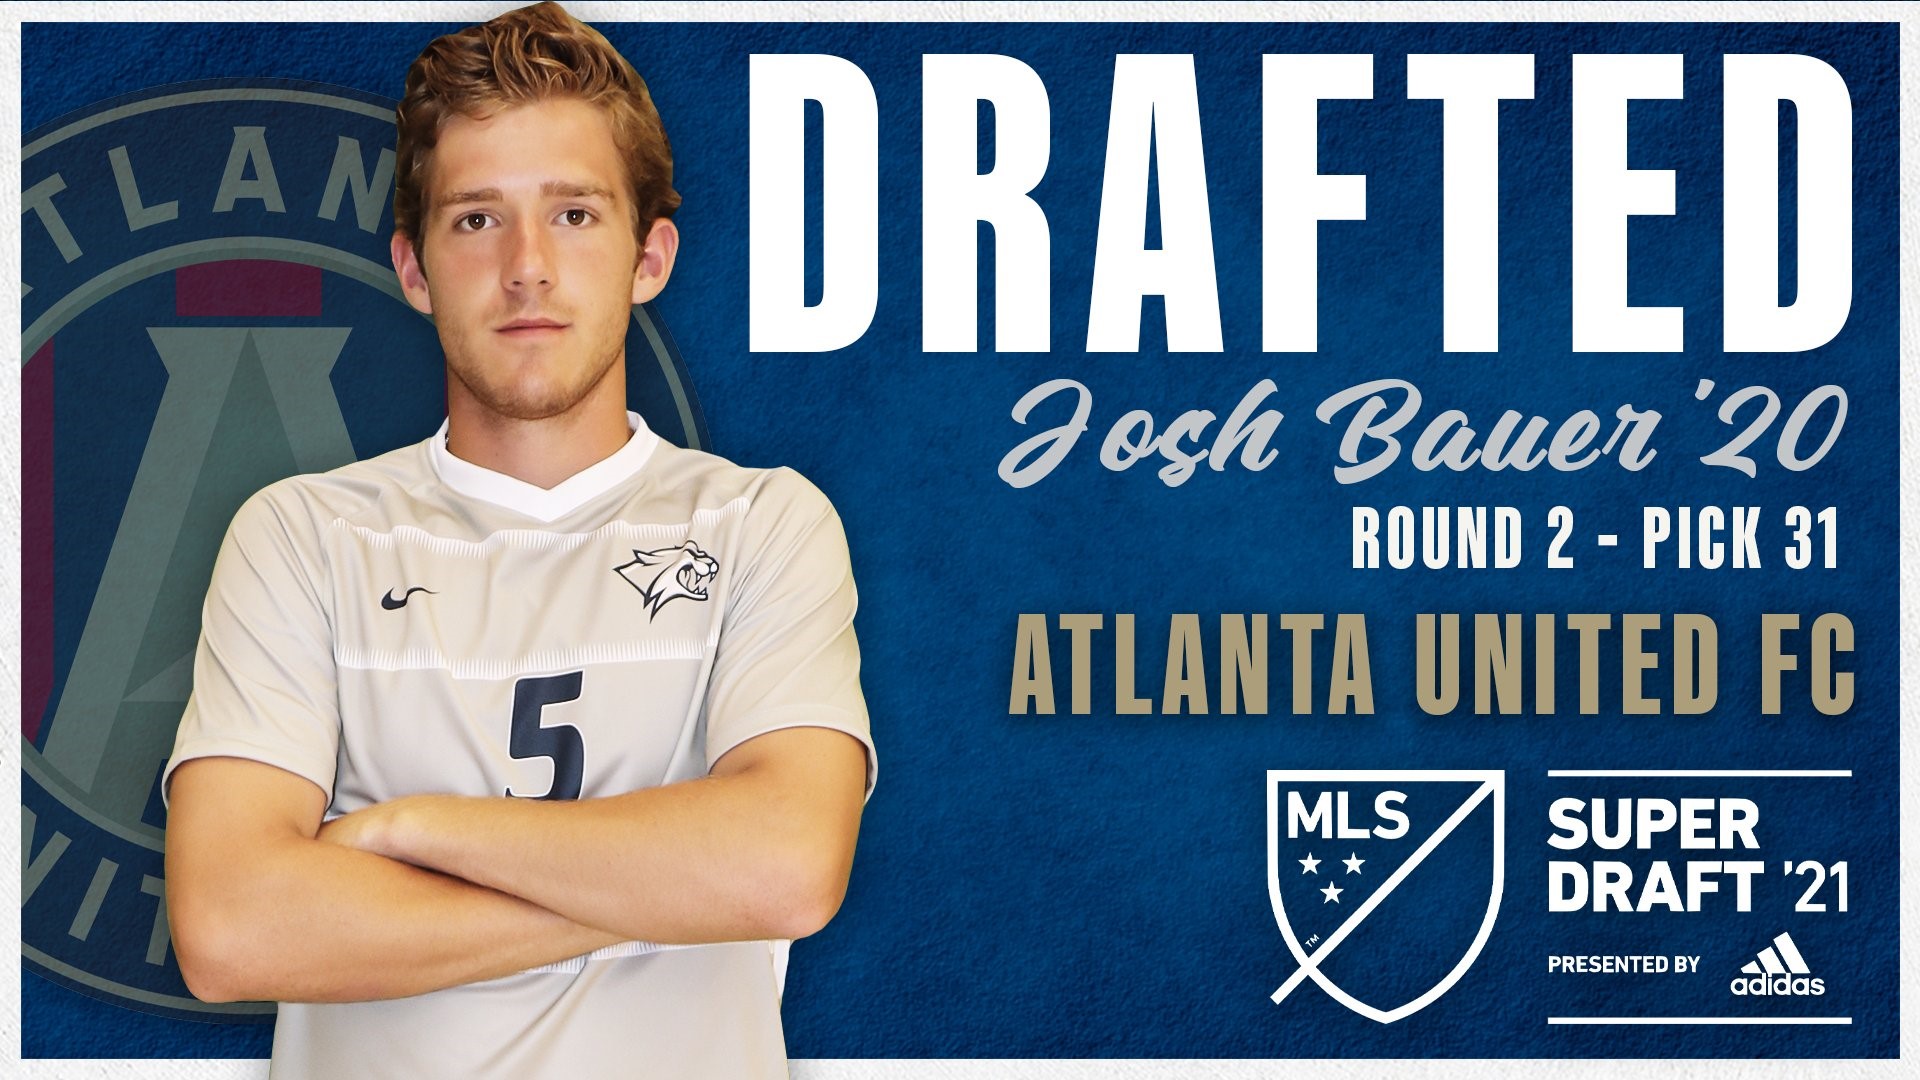 New Hampshire native and UNH graduate Josh Bauer is one of only two players at UNH history to be drafted by a Major League Soccer team.